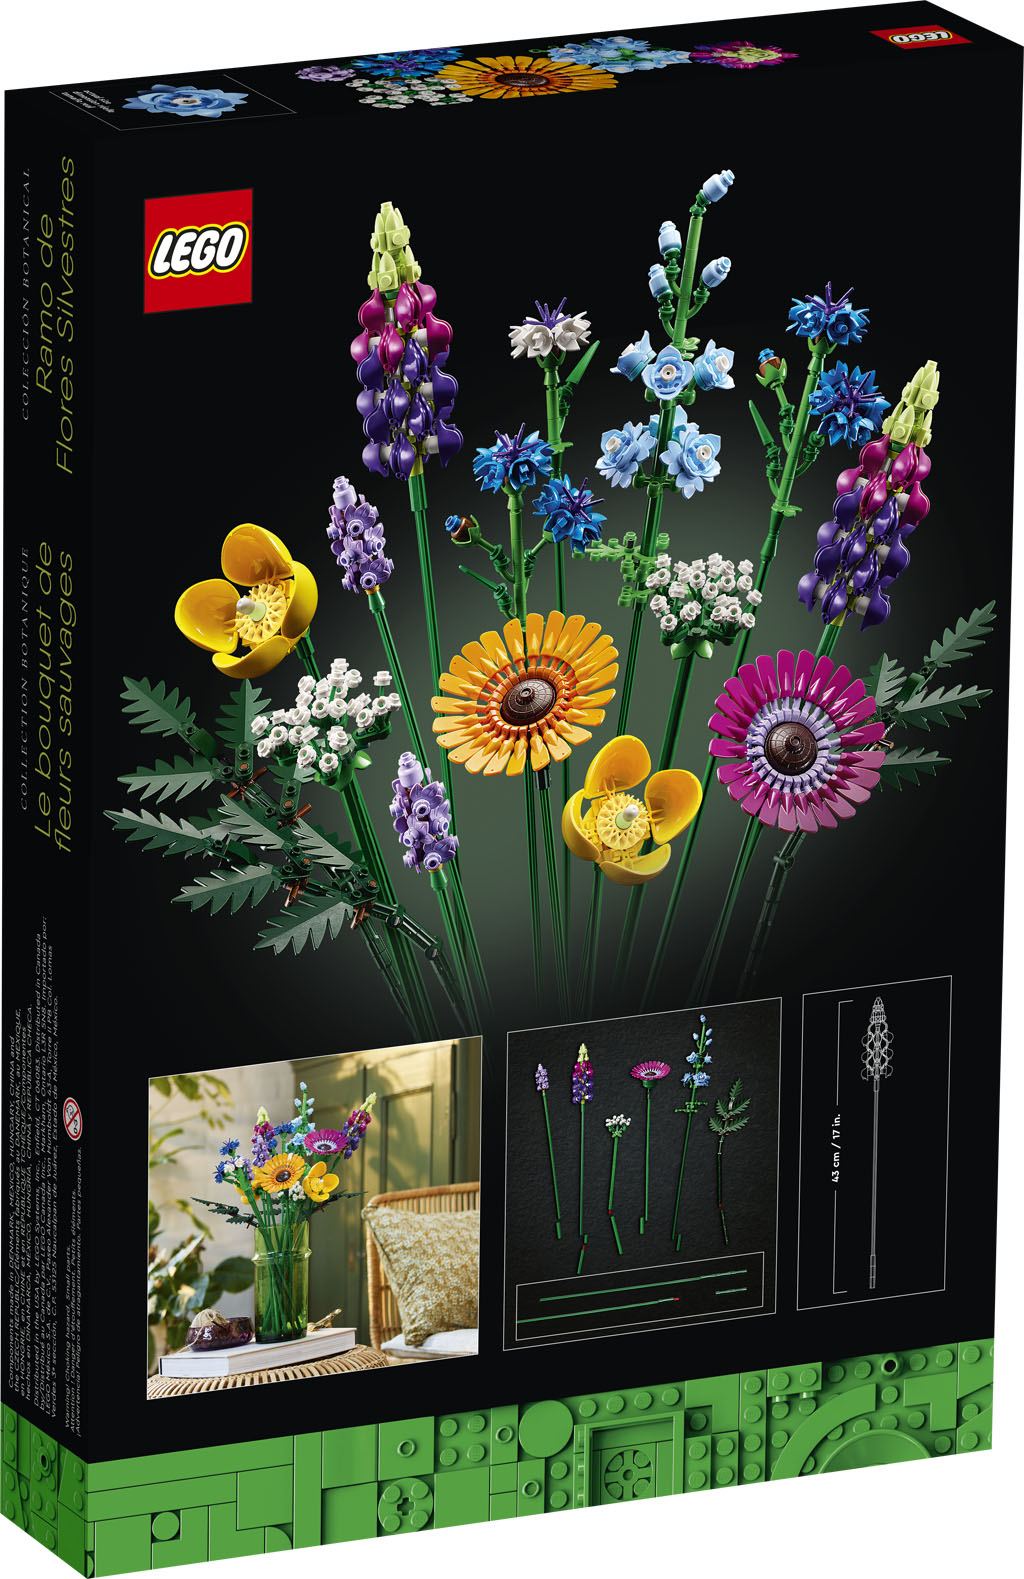 LEGO Icons Botanical Collection Officially Revealed The Brick Fan